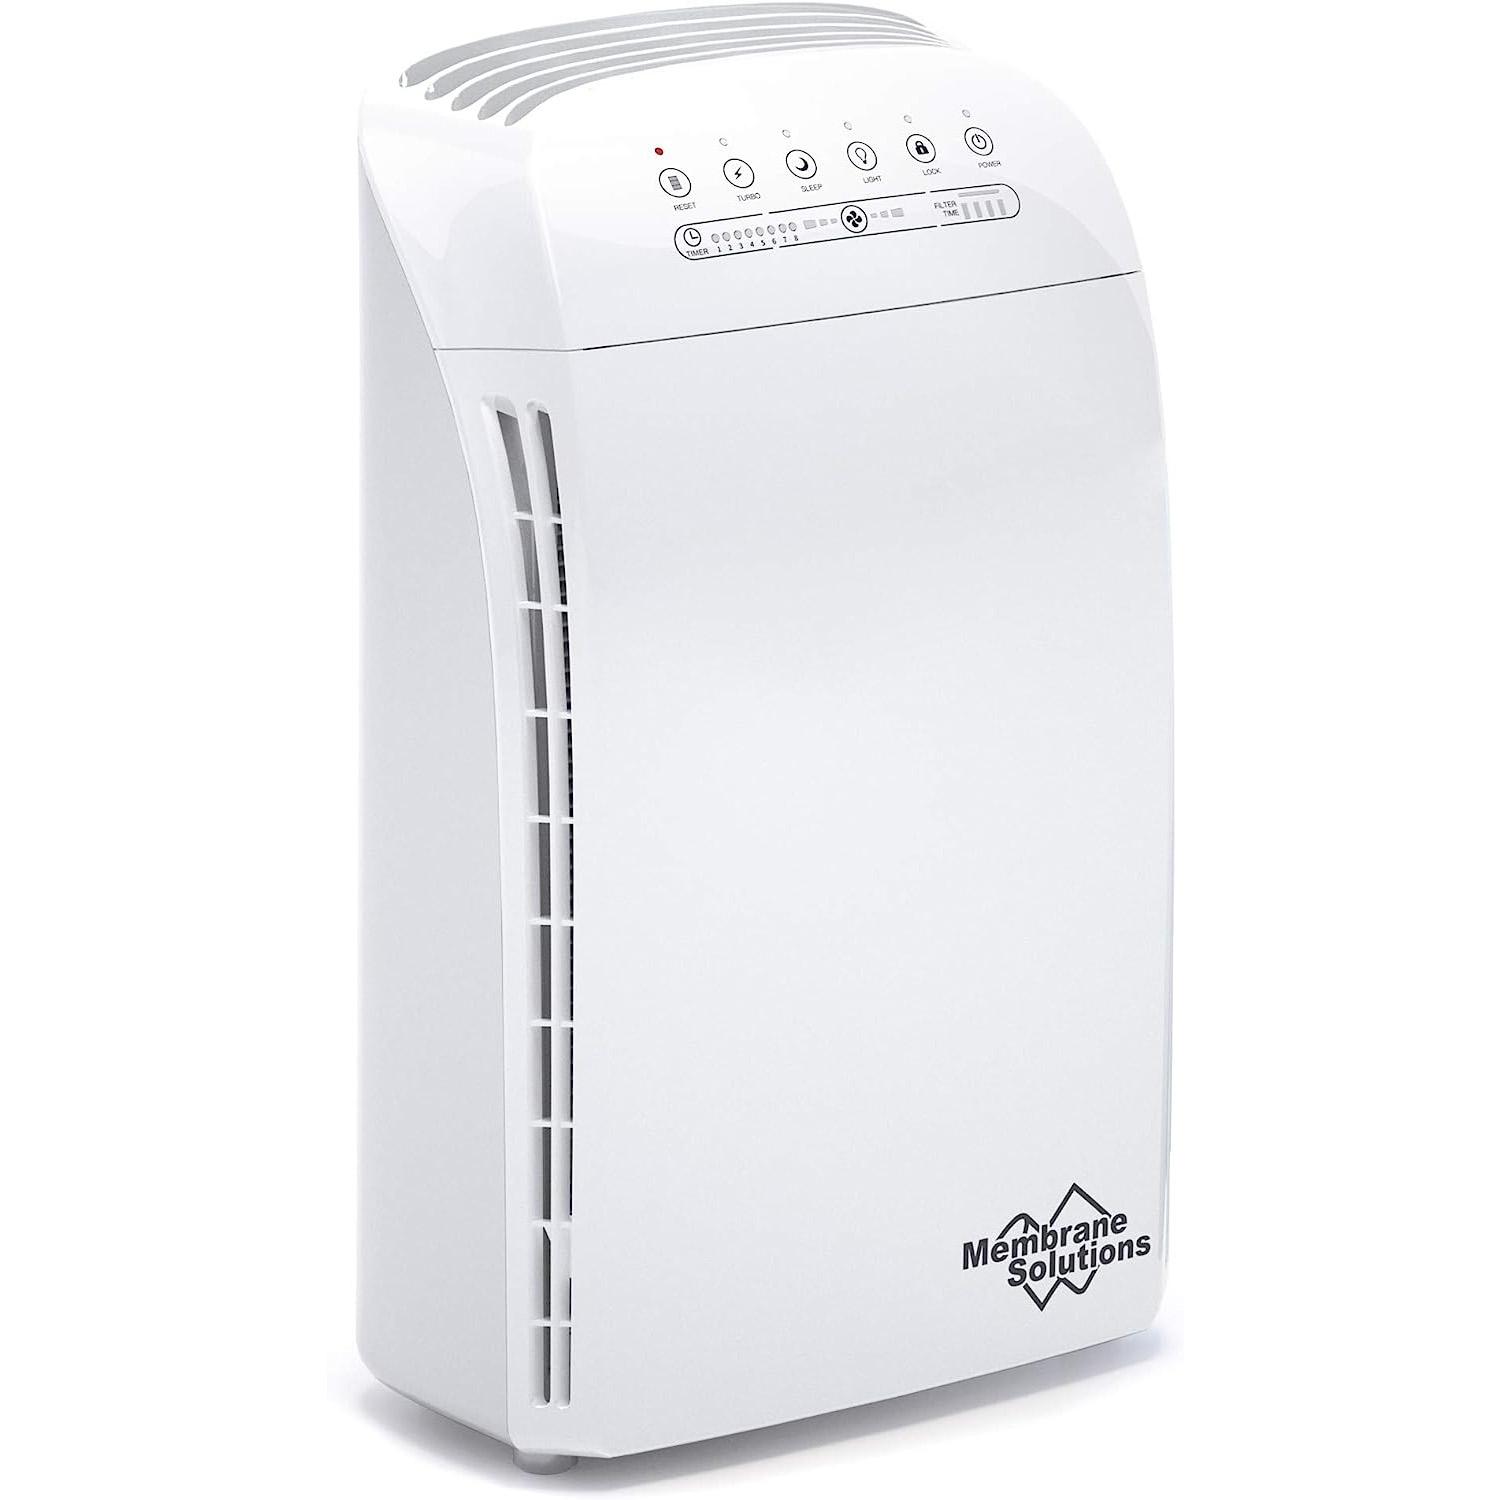 MSA3 Tue HEPA Air Purifier Filter for Home Large Room for $62.78 Shipped